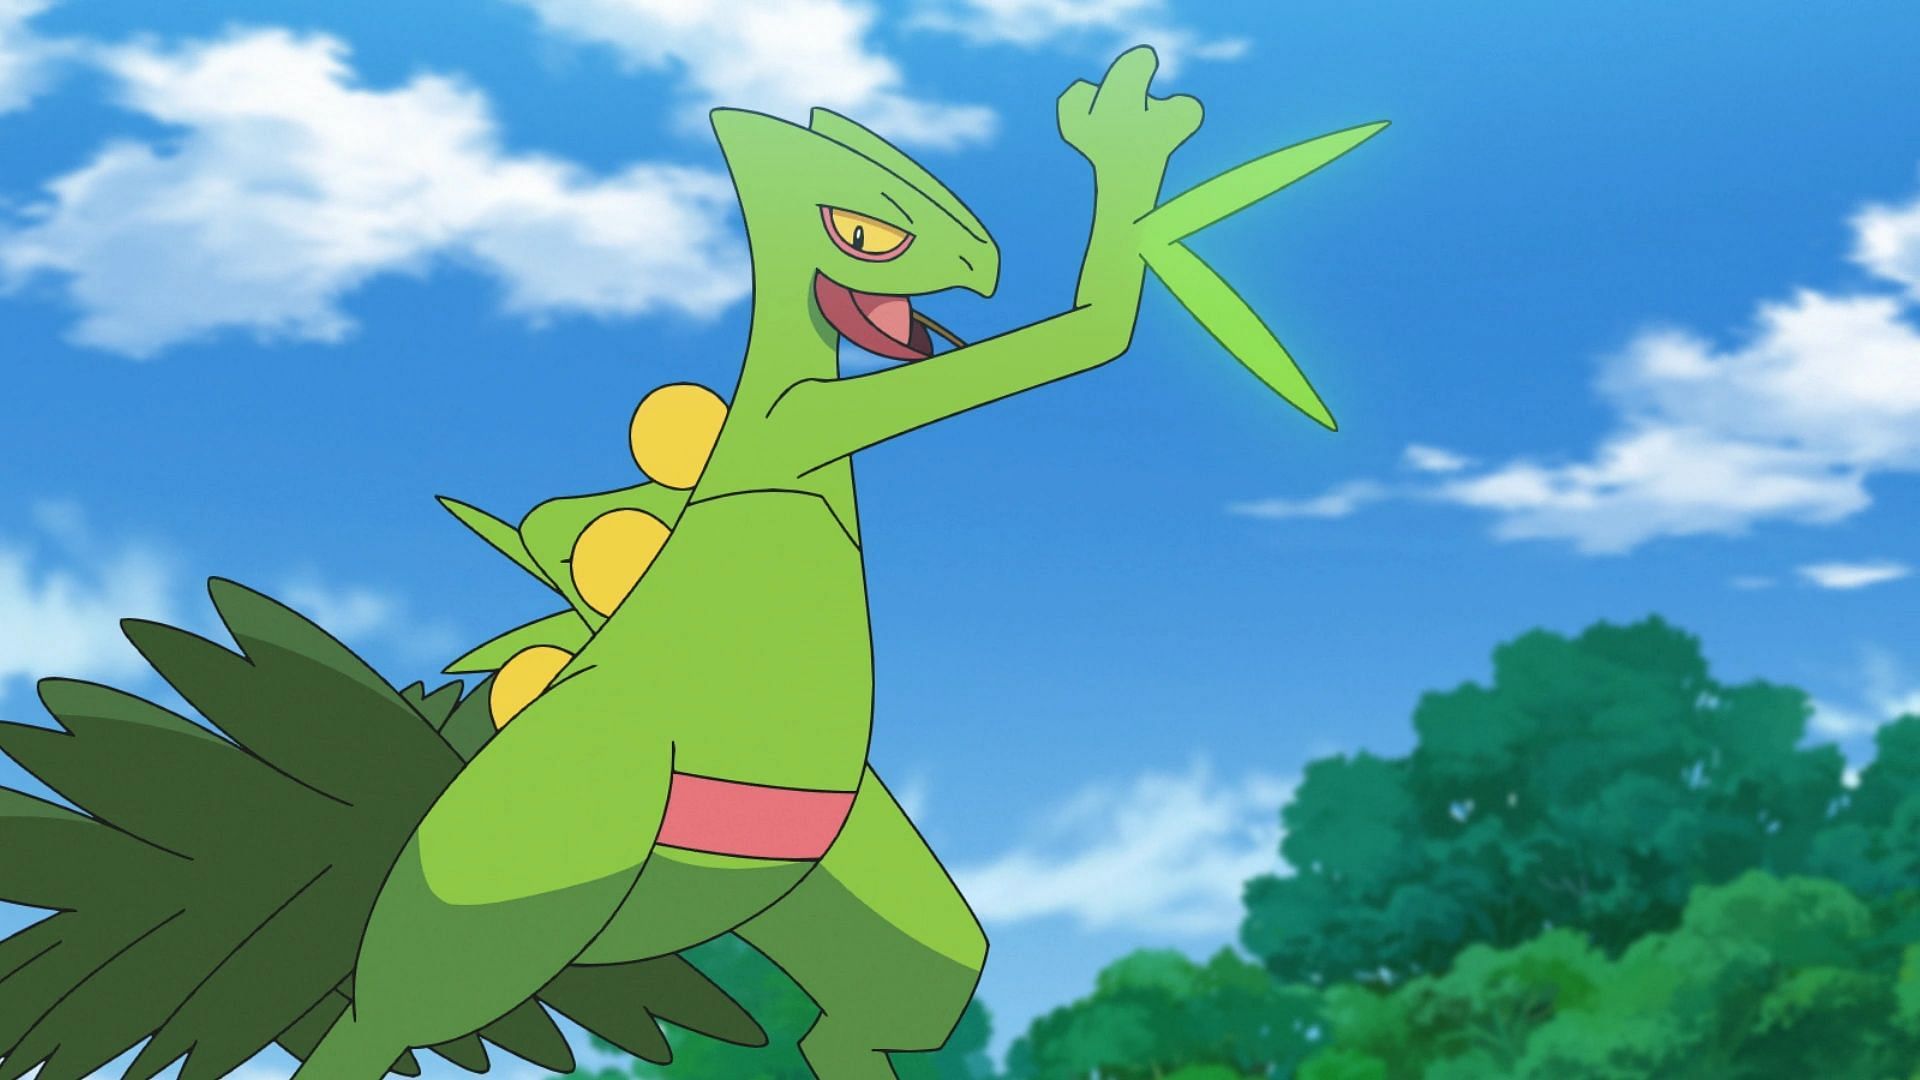 Sceptile as it appears in the anime (Image via The Pokemon Company)